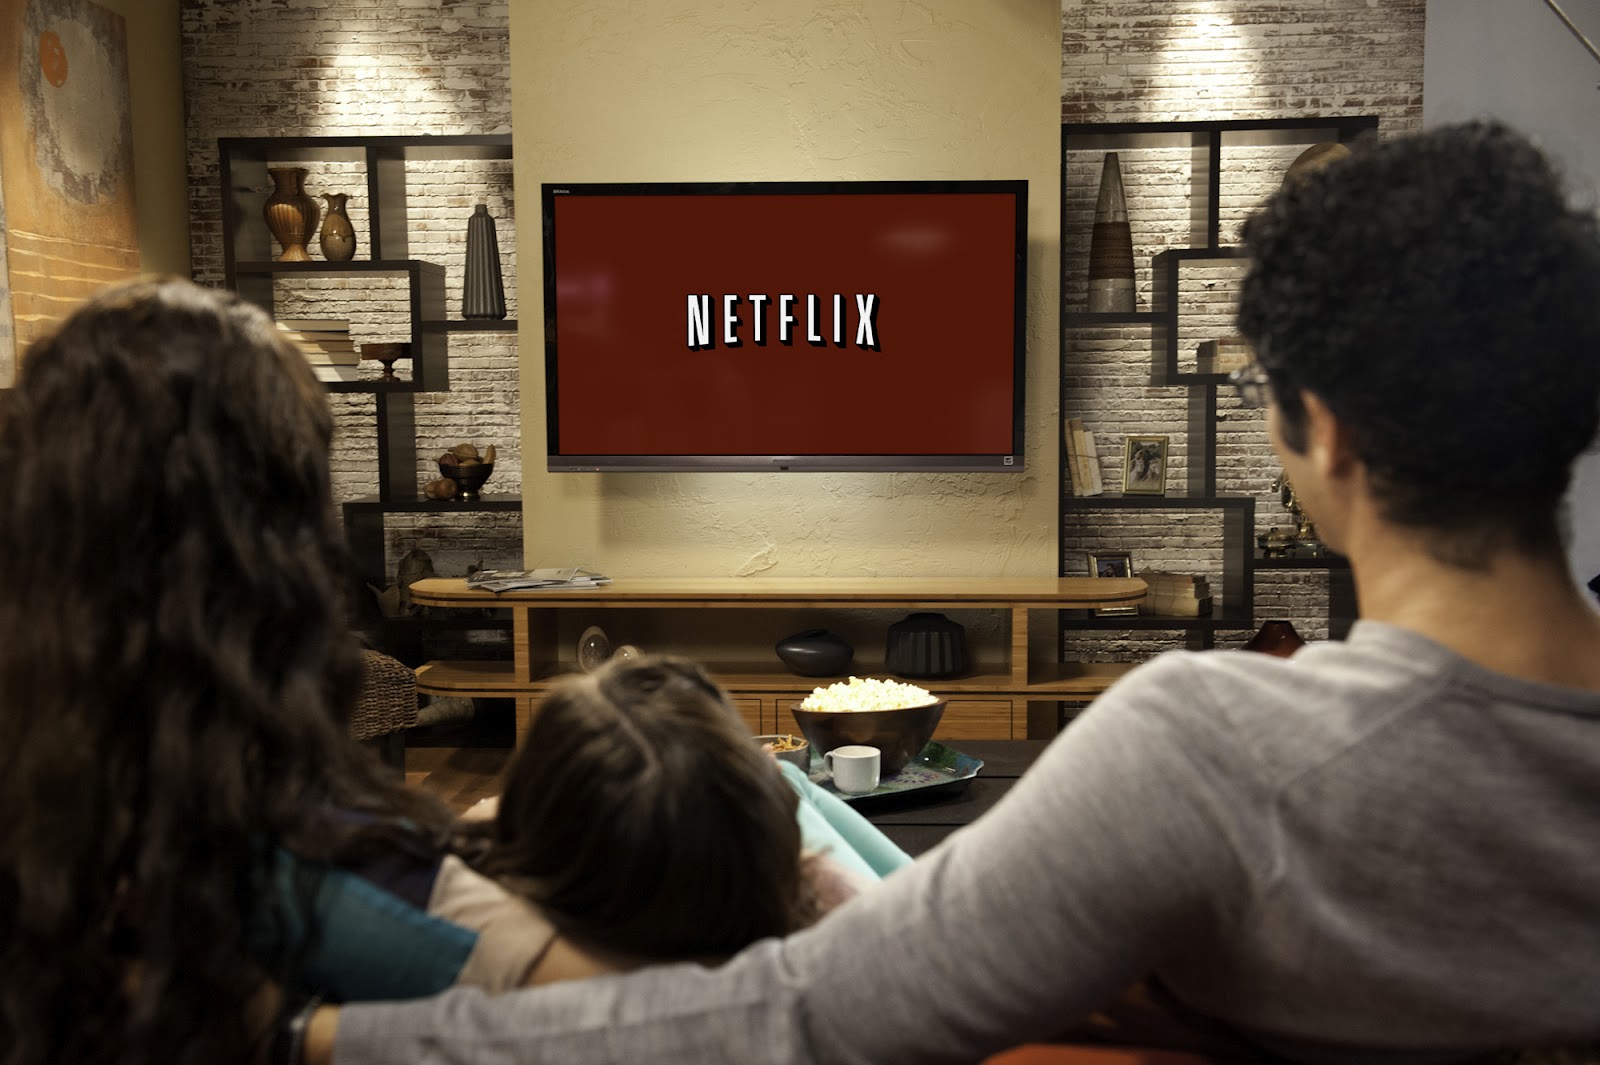 Netflix Video Streaming to Launch in Norway, Denmark, Sweden and Finland in 2012